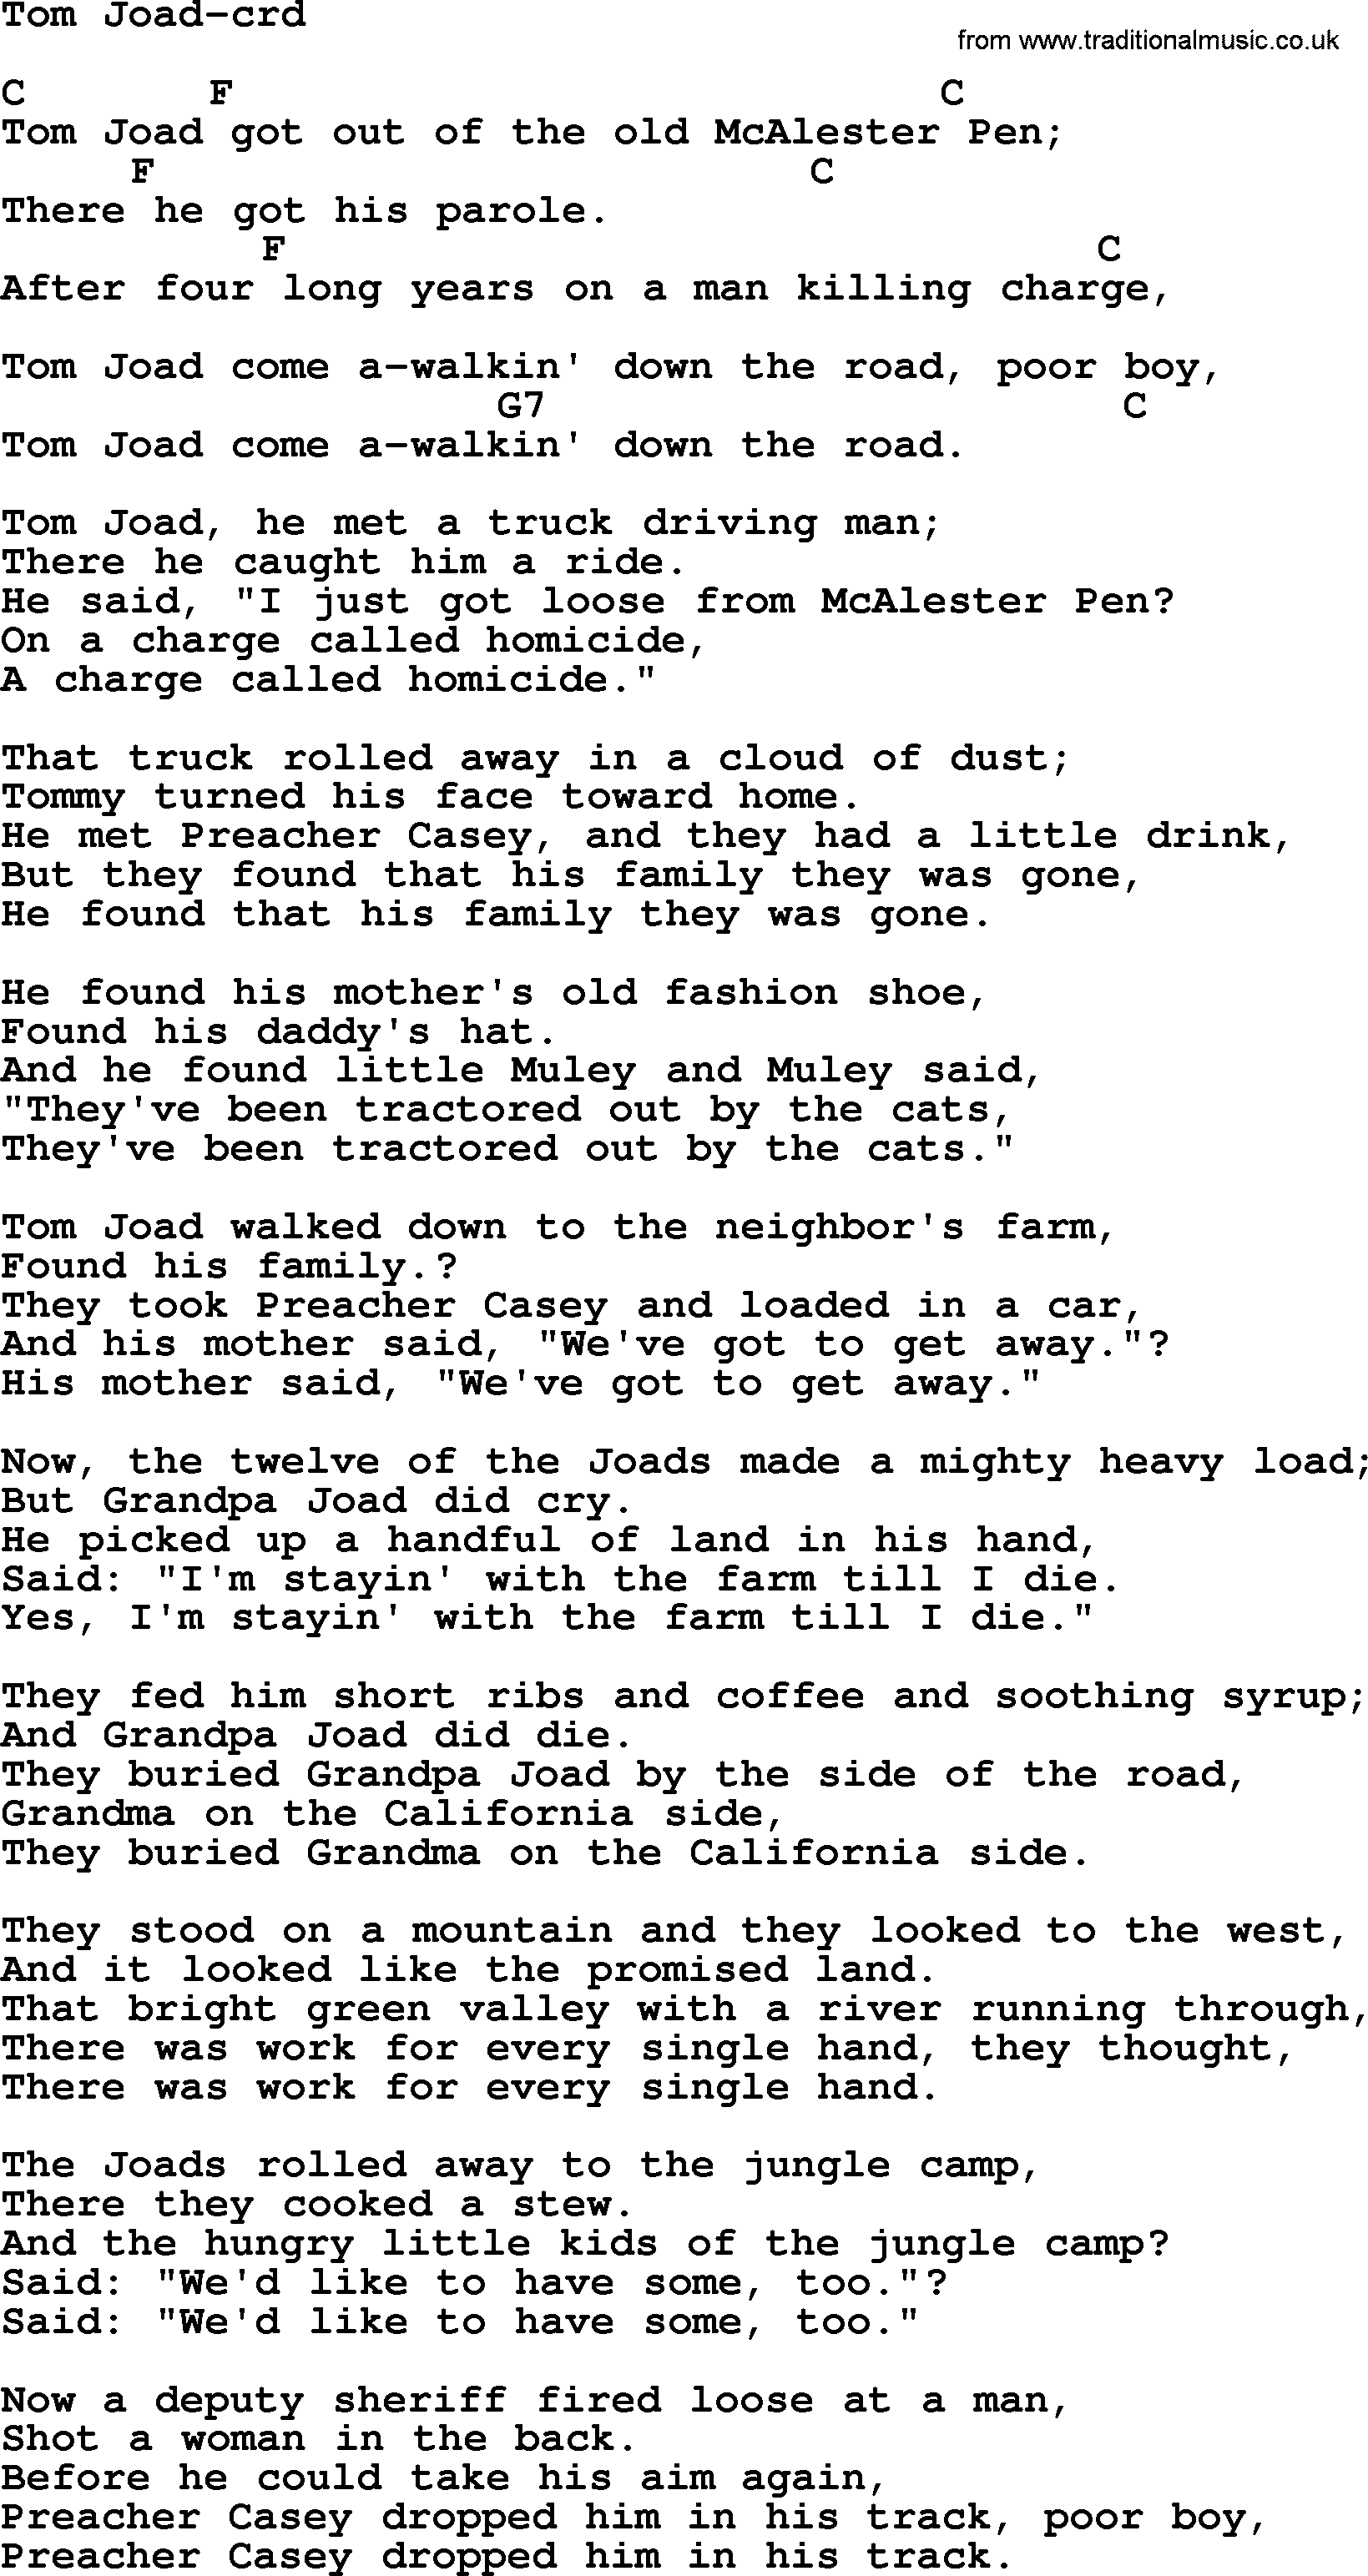 Woody Guthrie song Tom Joad lyrics and chords